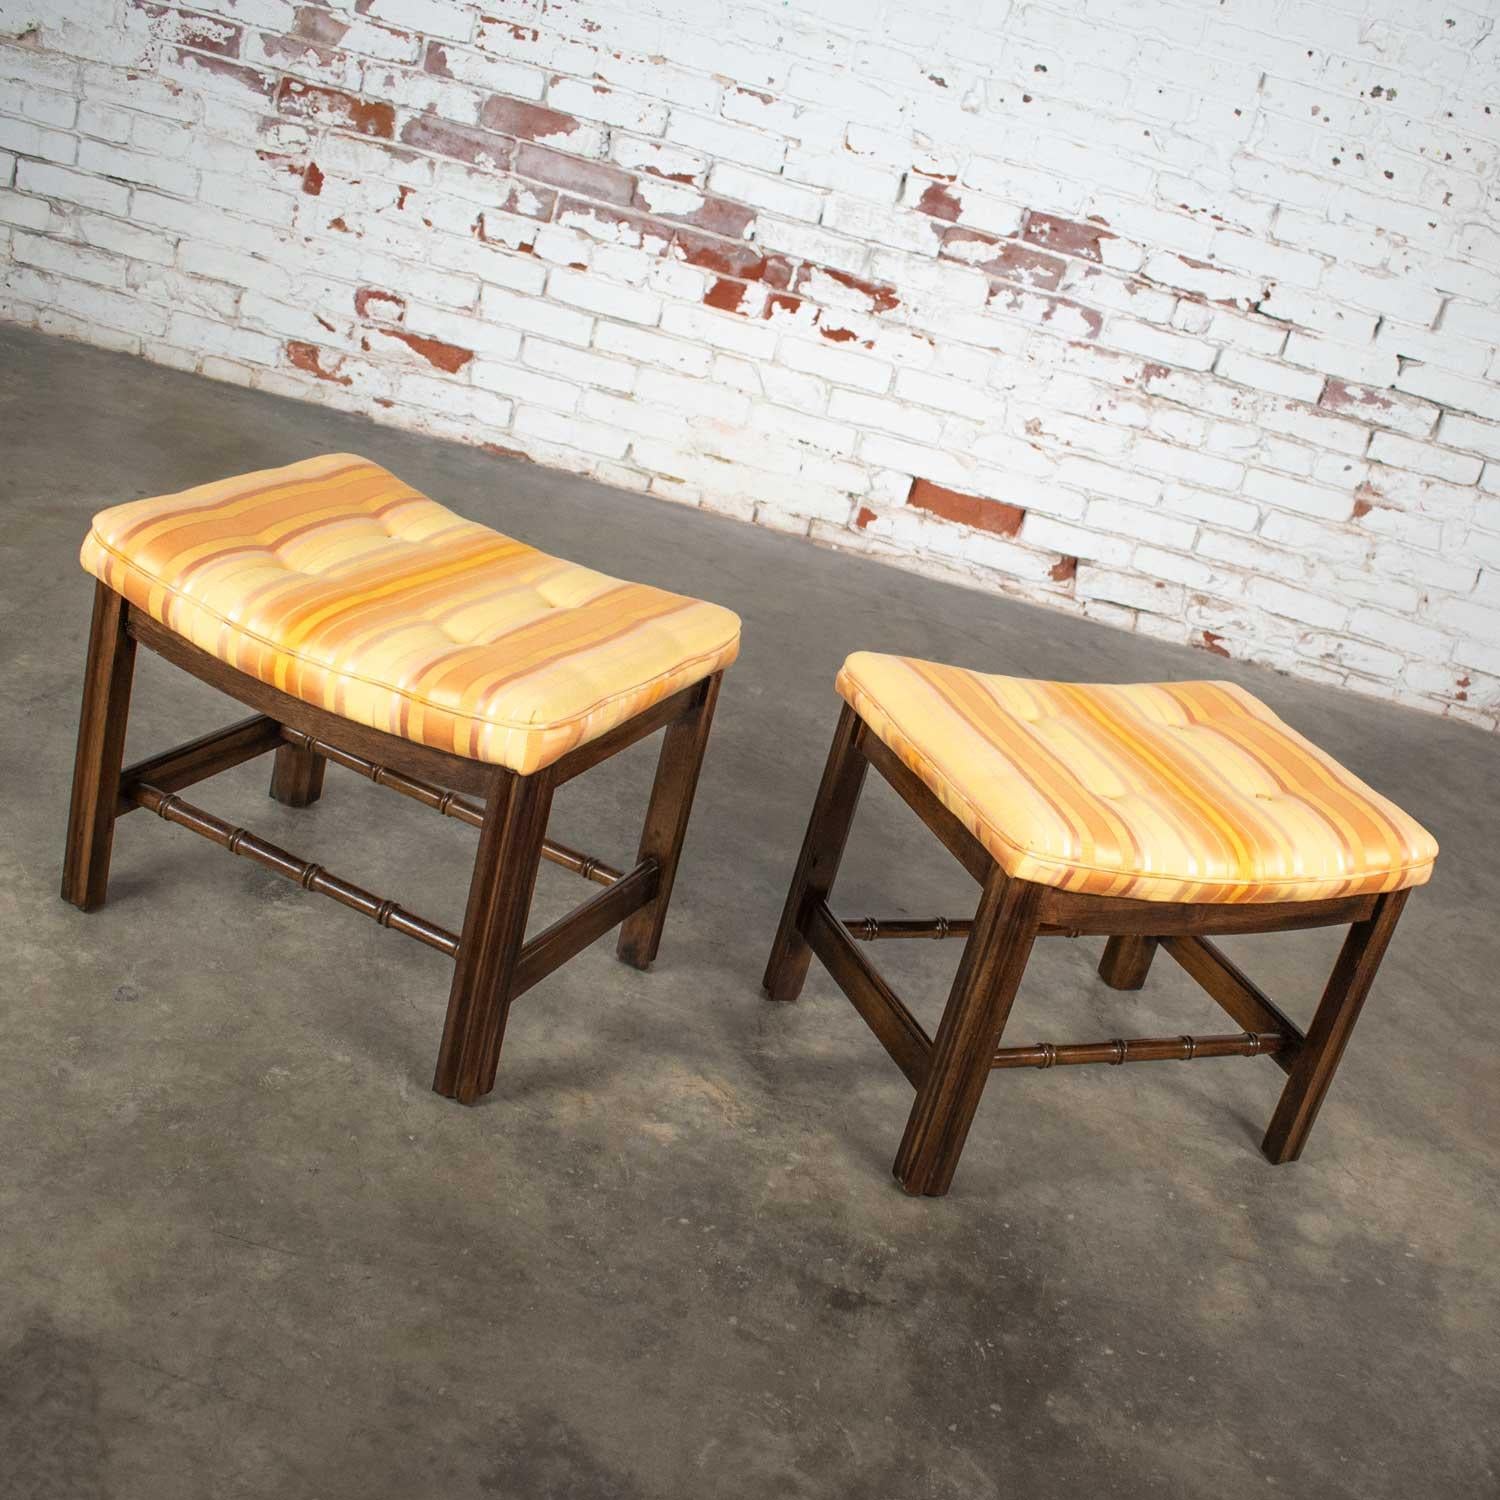 Chinese Chippendale Pair of Foot Stools in Orange and Yellow Stripe Upholstery 2